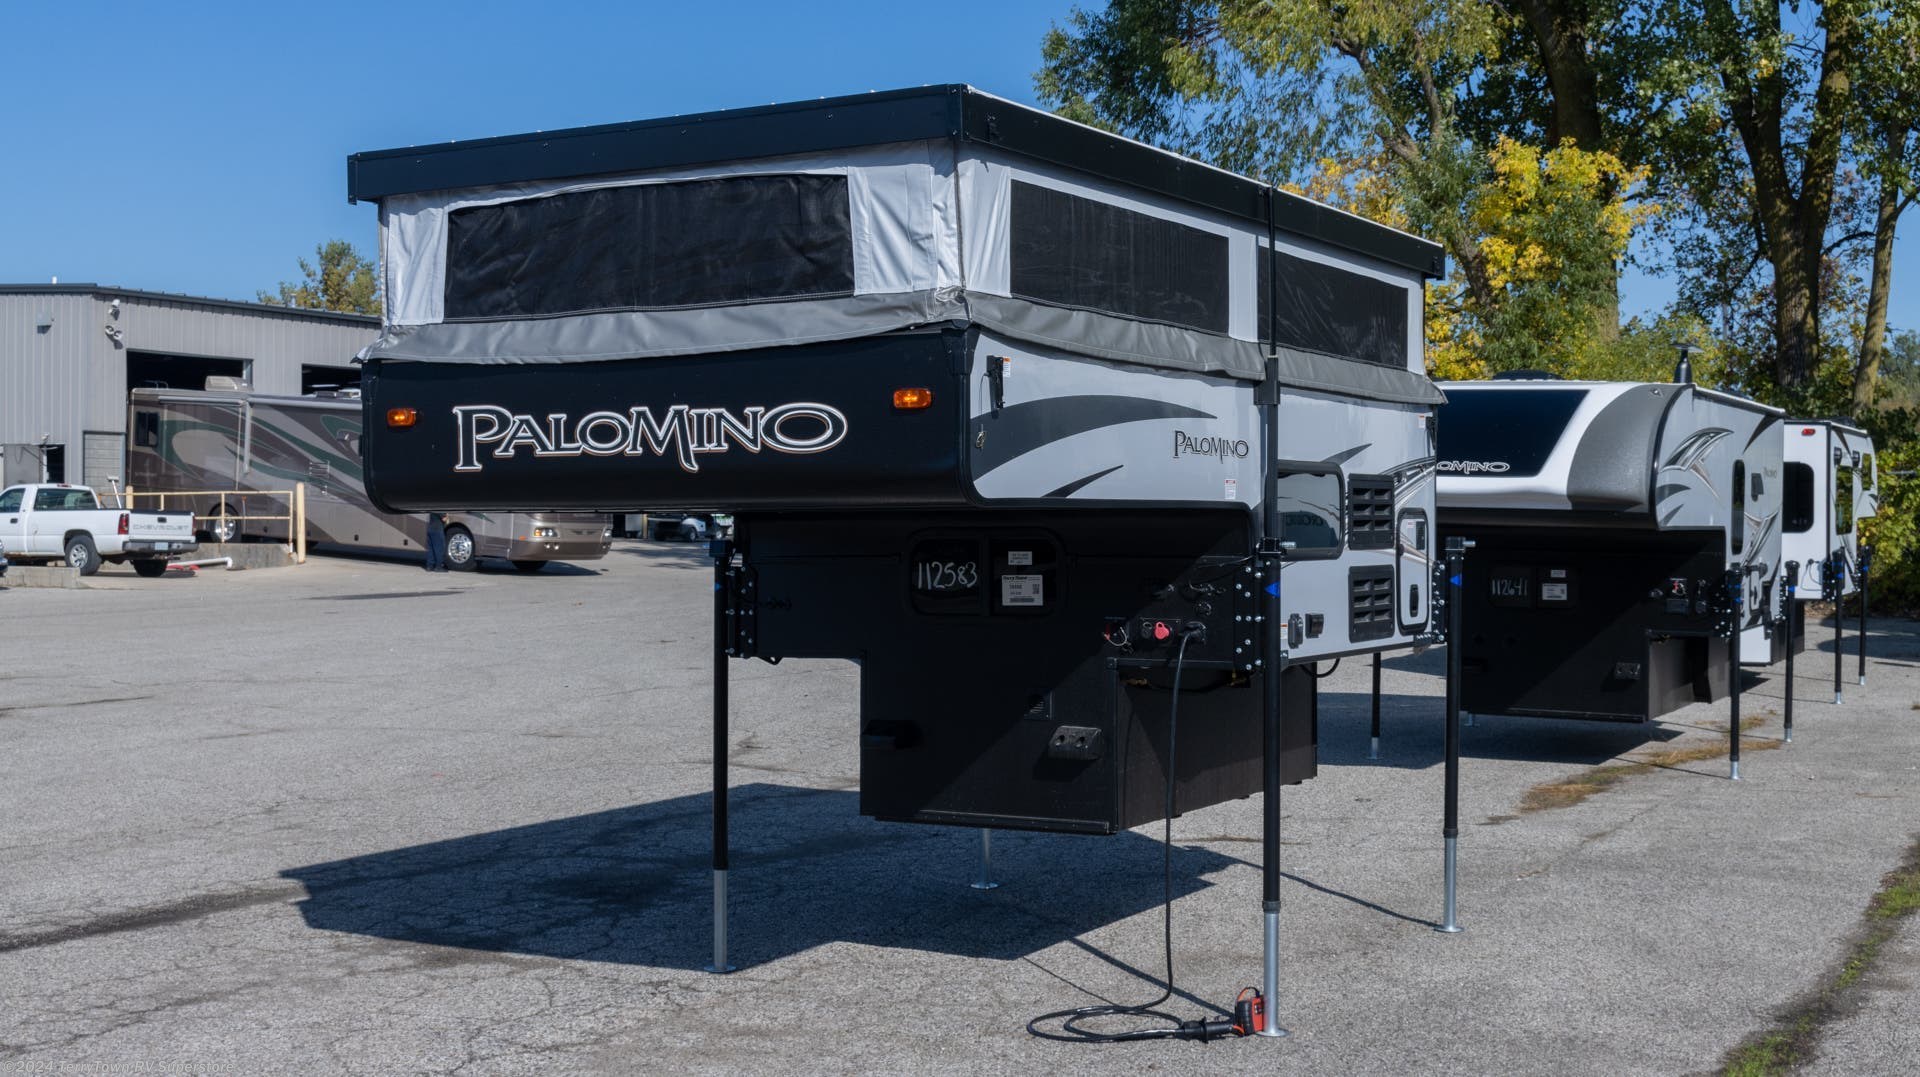 2021 Palomino Backpack Edition RV for Sale in Grand Rapids, MI 49548 ...